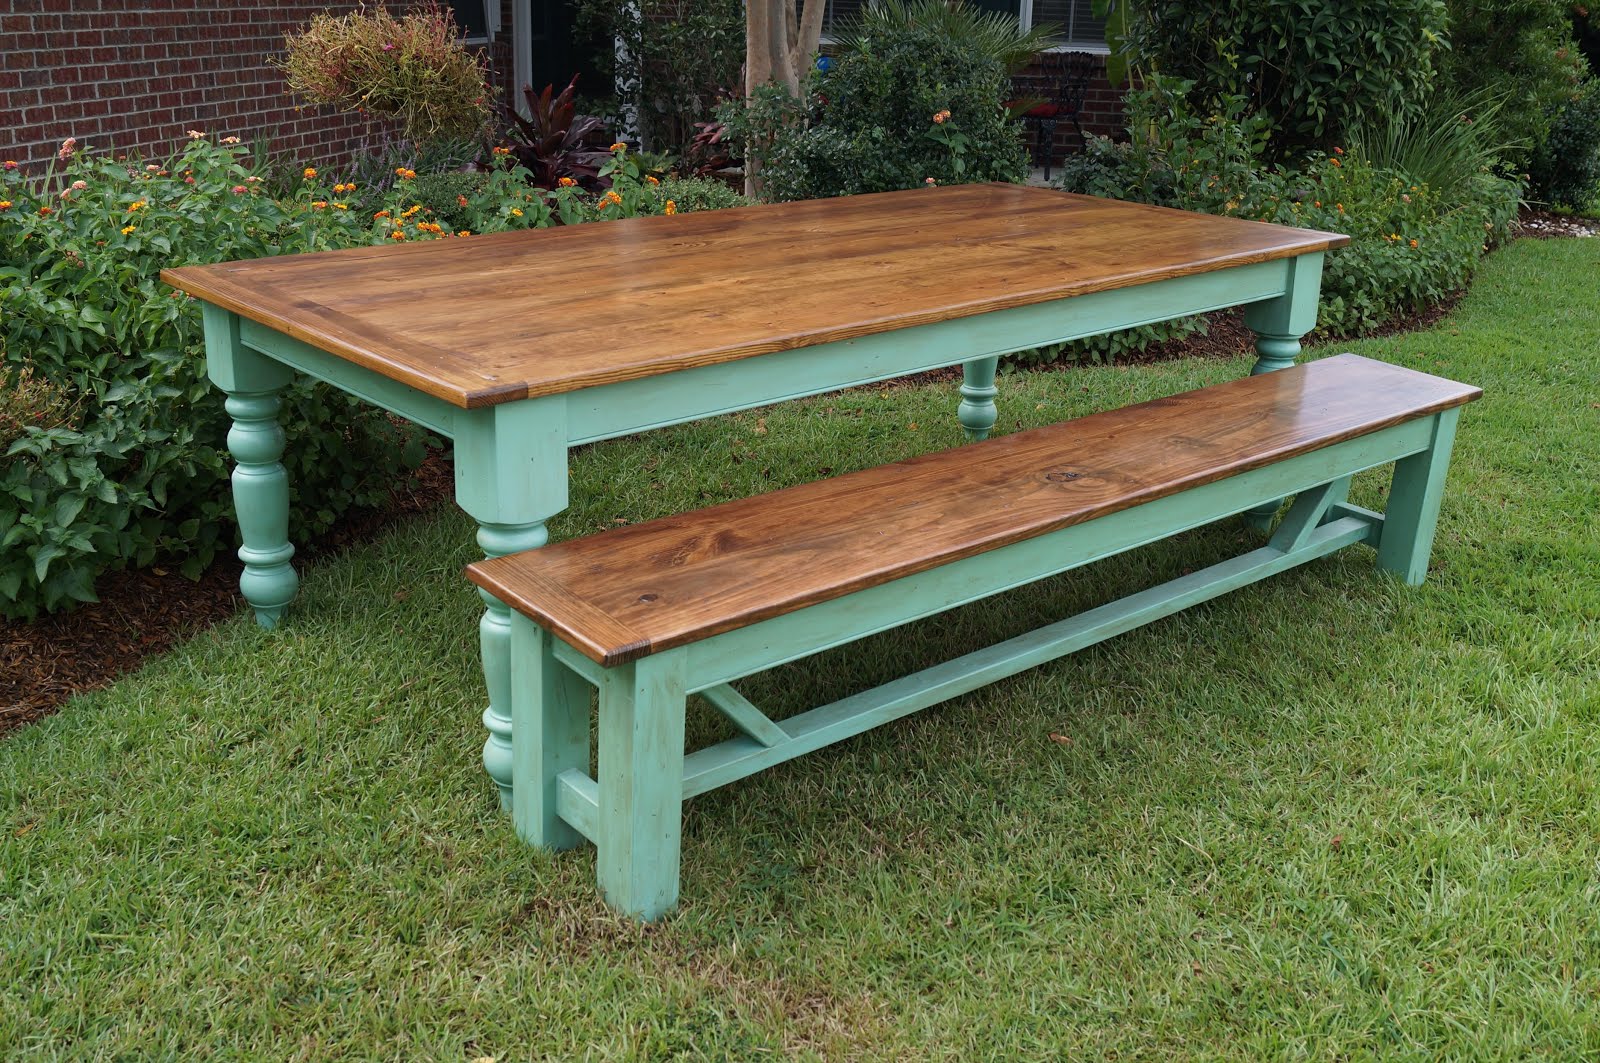 Low Country Farm Table 8ft x 4ft w/ 5" legs